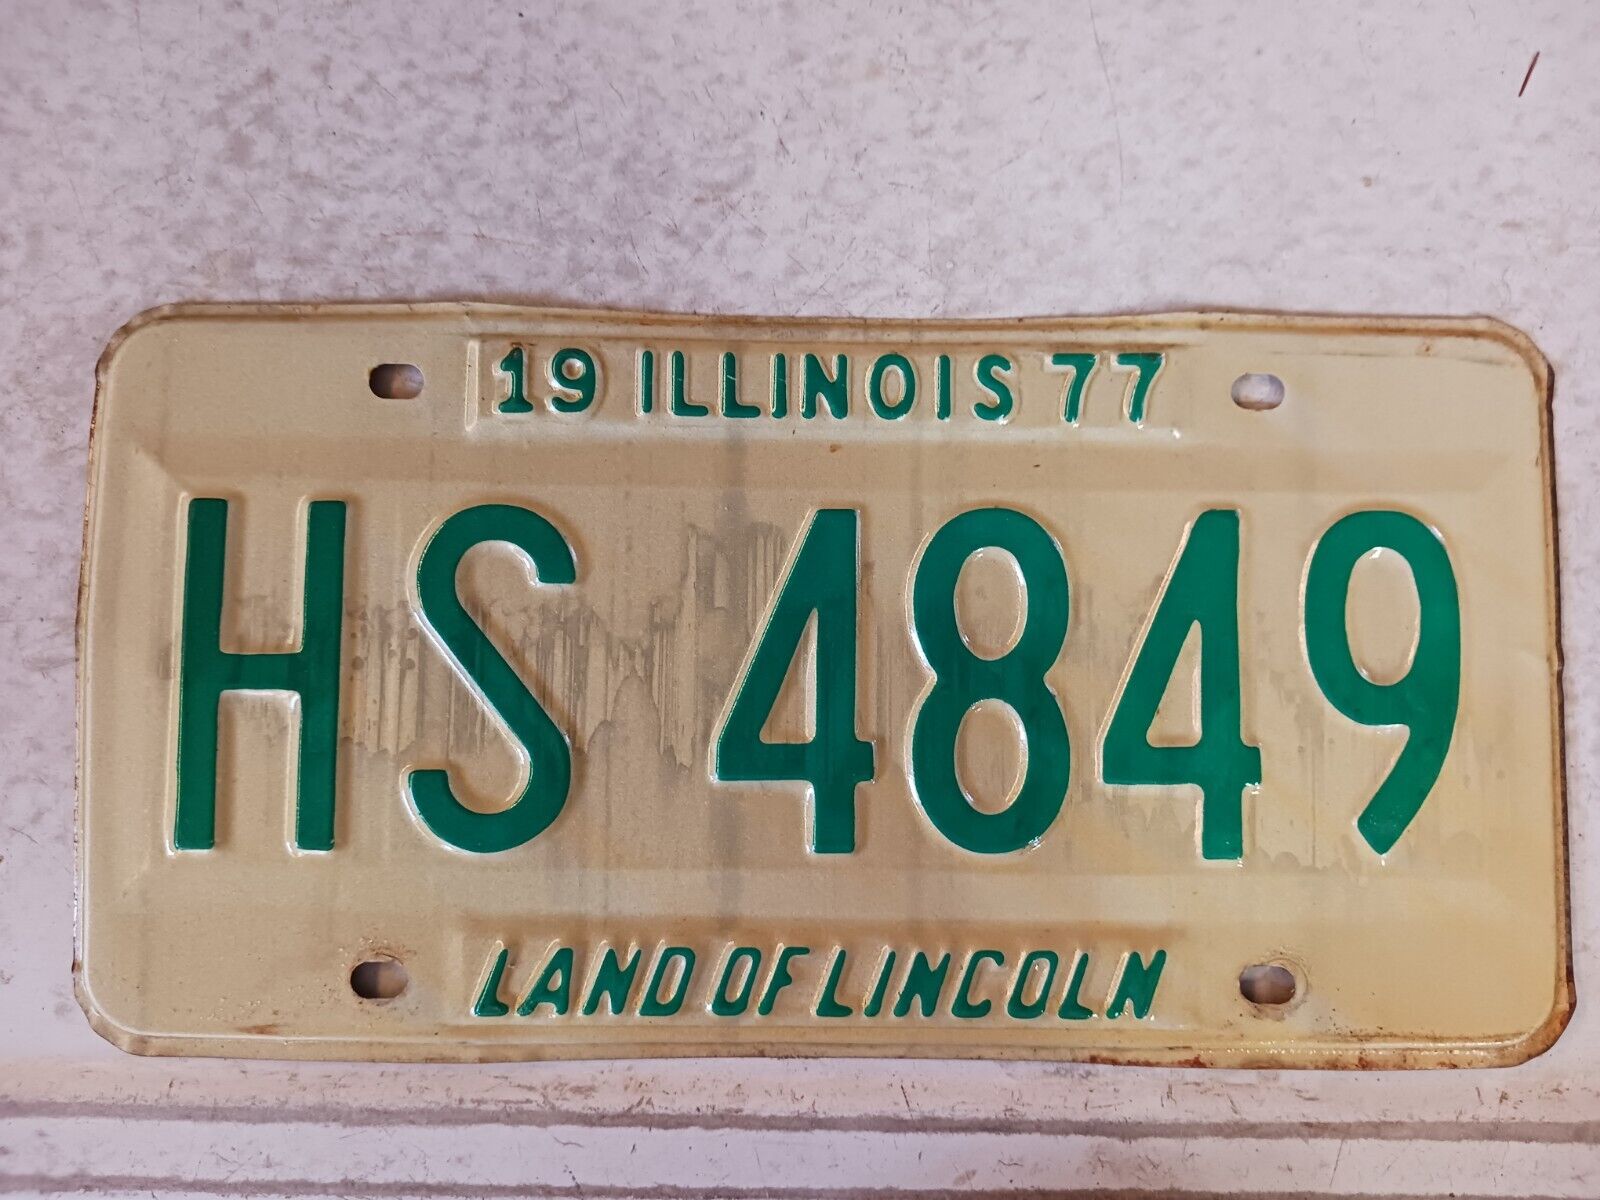 1977 Illinois License Plate HS 4849 ✅️ Land of Lincoln 